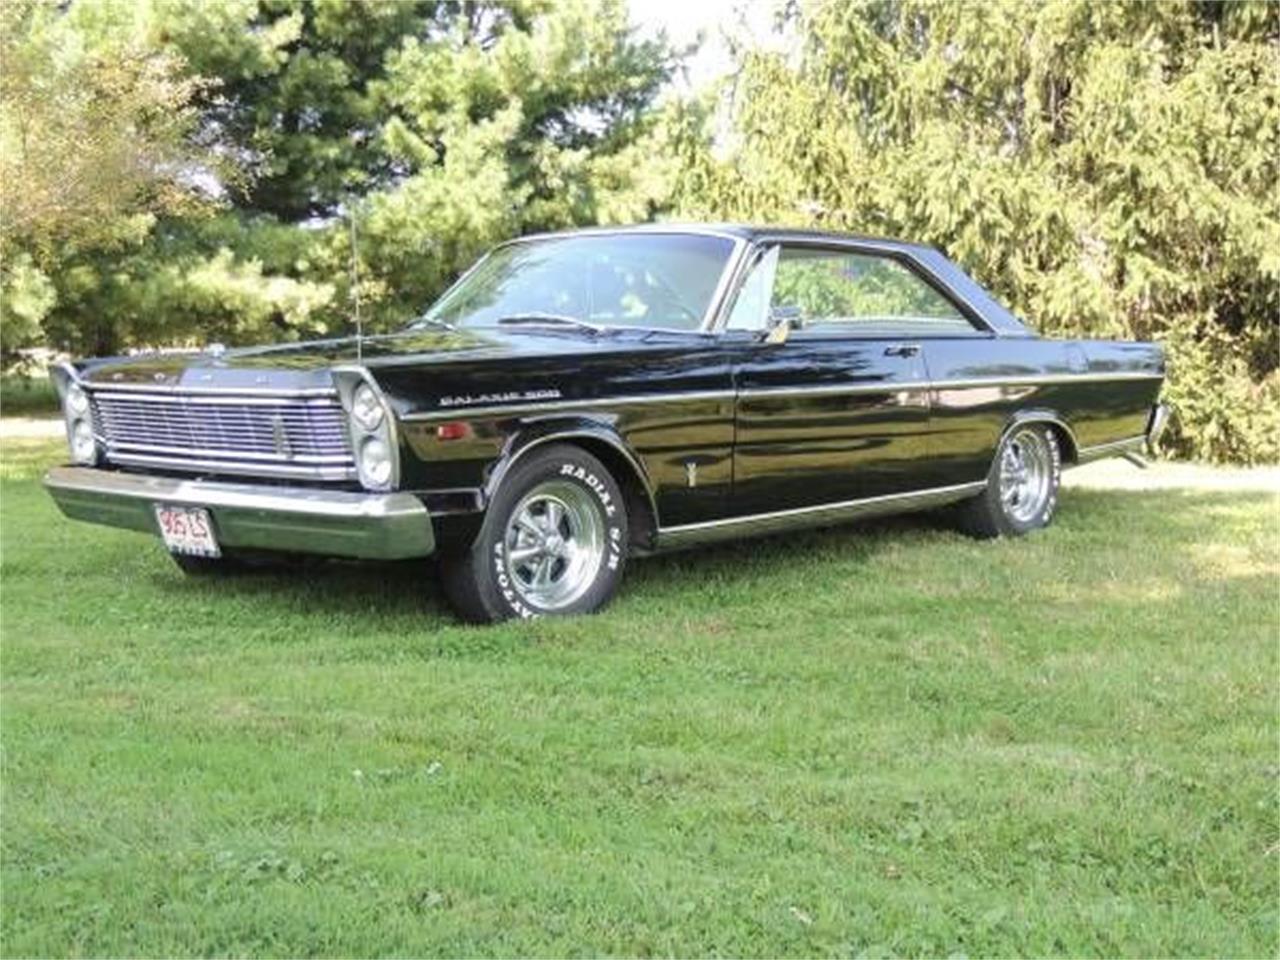 1965 Ford Galaxie 500 for Sale | ClassicCars.com | CC-1121078